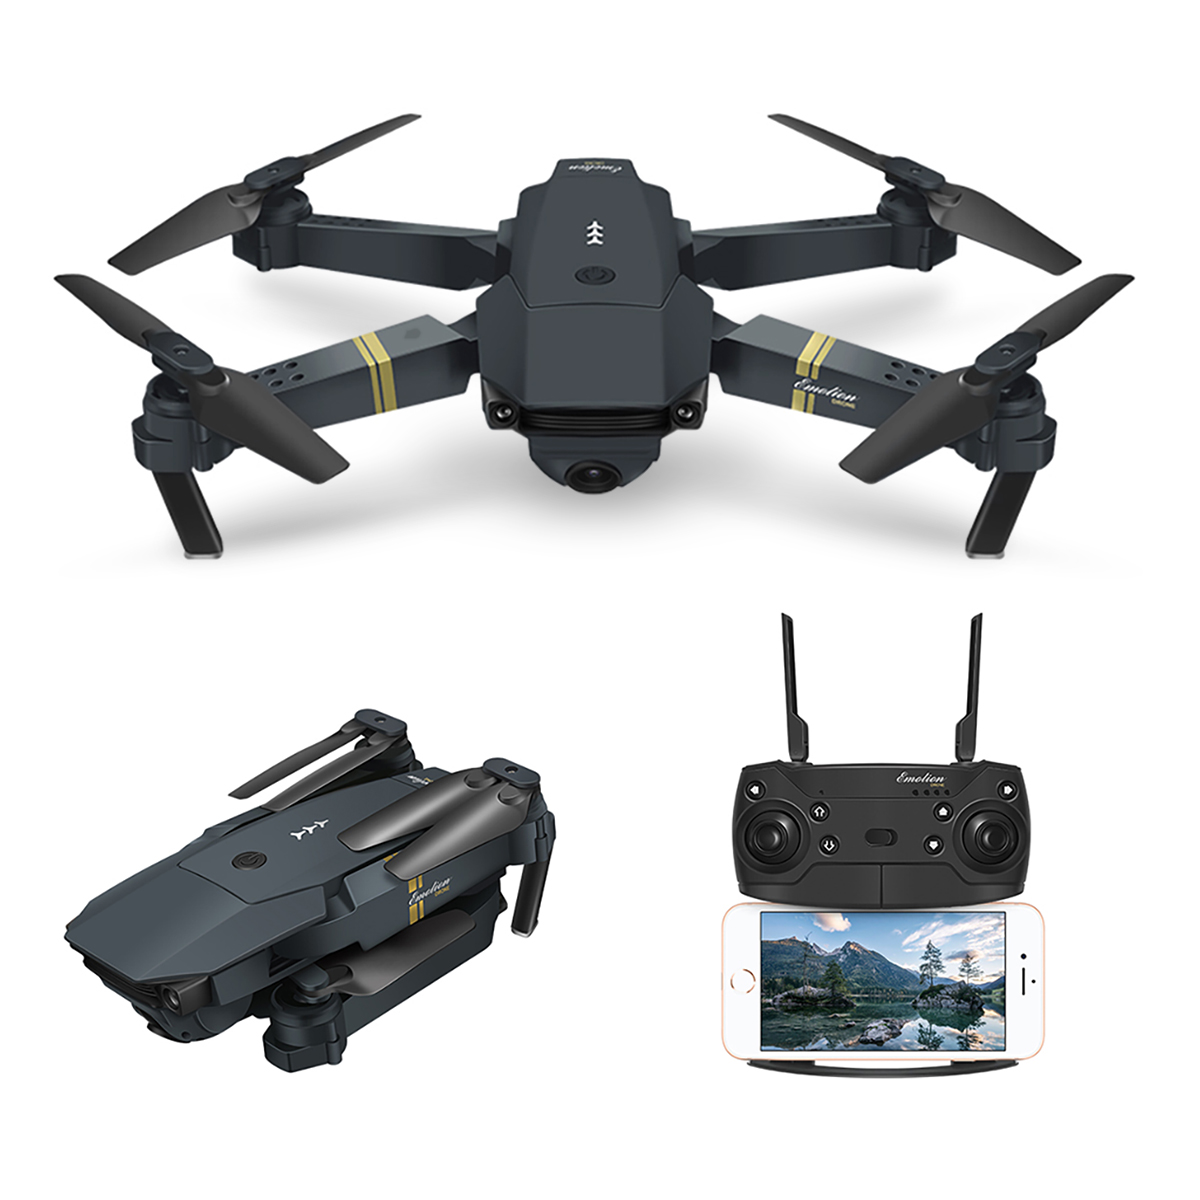 NEW Eachine E58 WIFI FPV 2MP Camera Foldable Arm RC Drone Quadcopter Toy Gift!!!